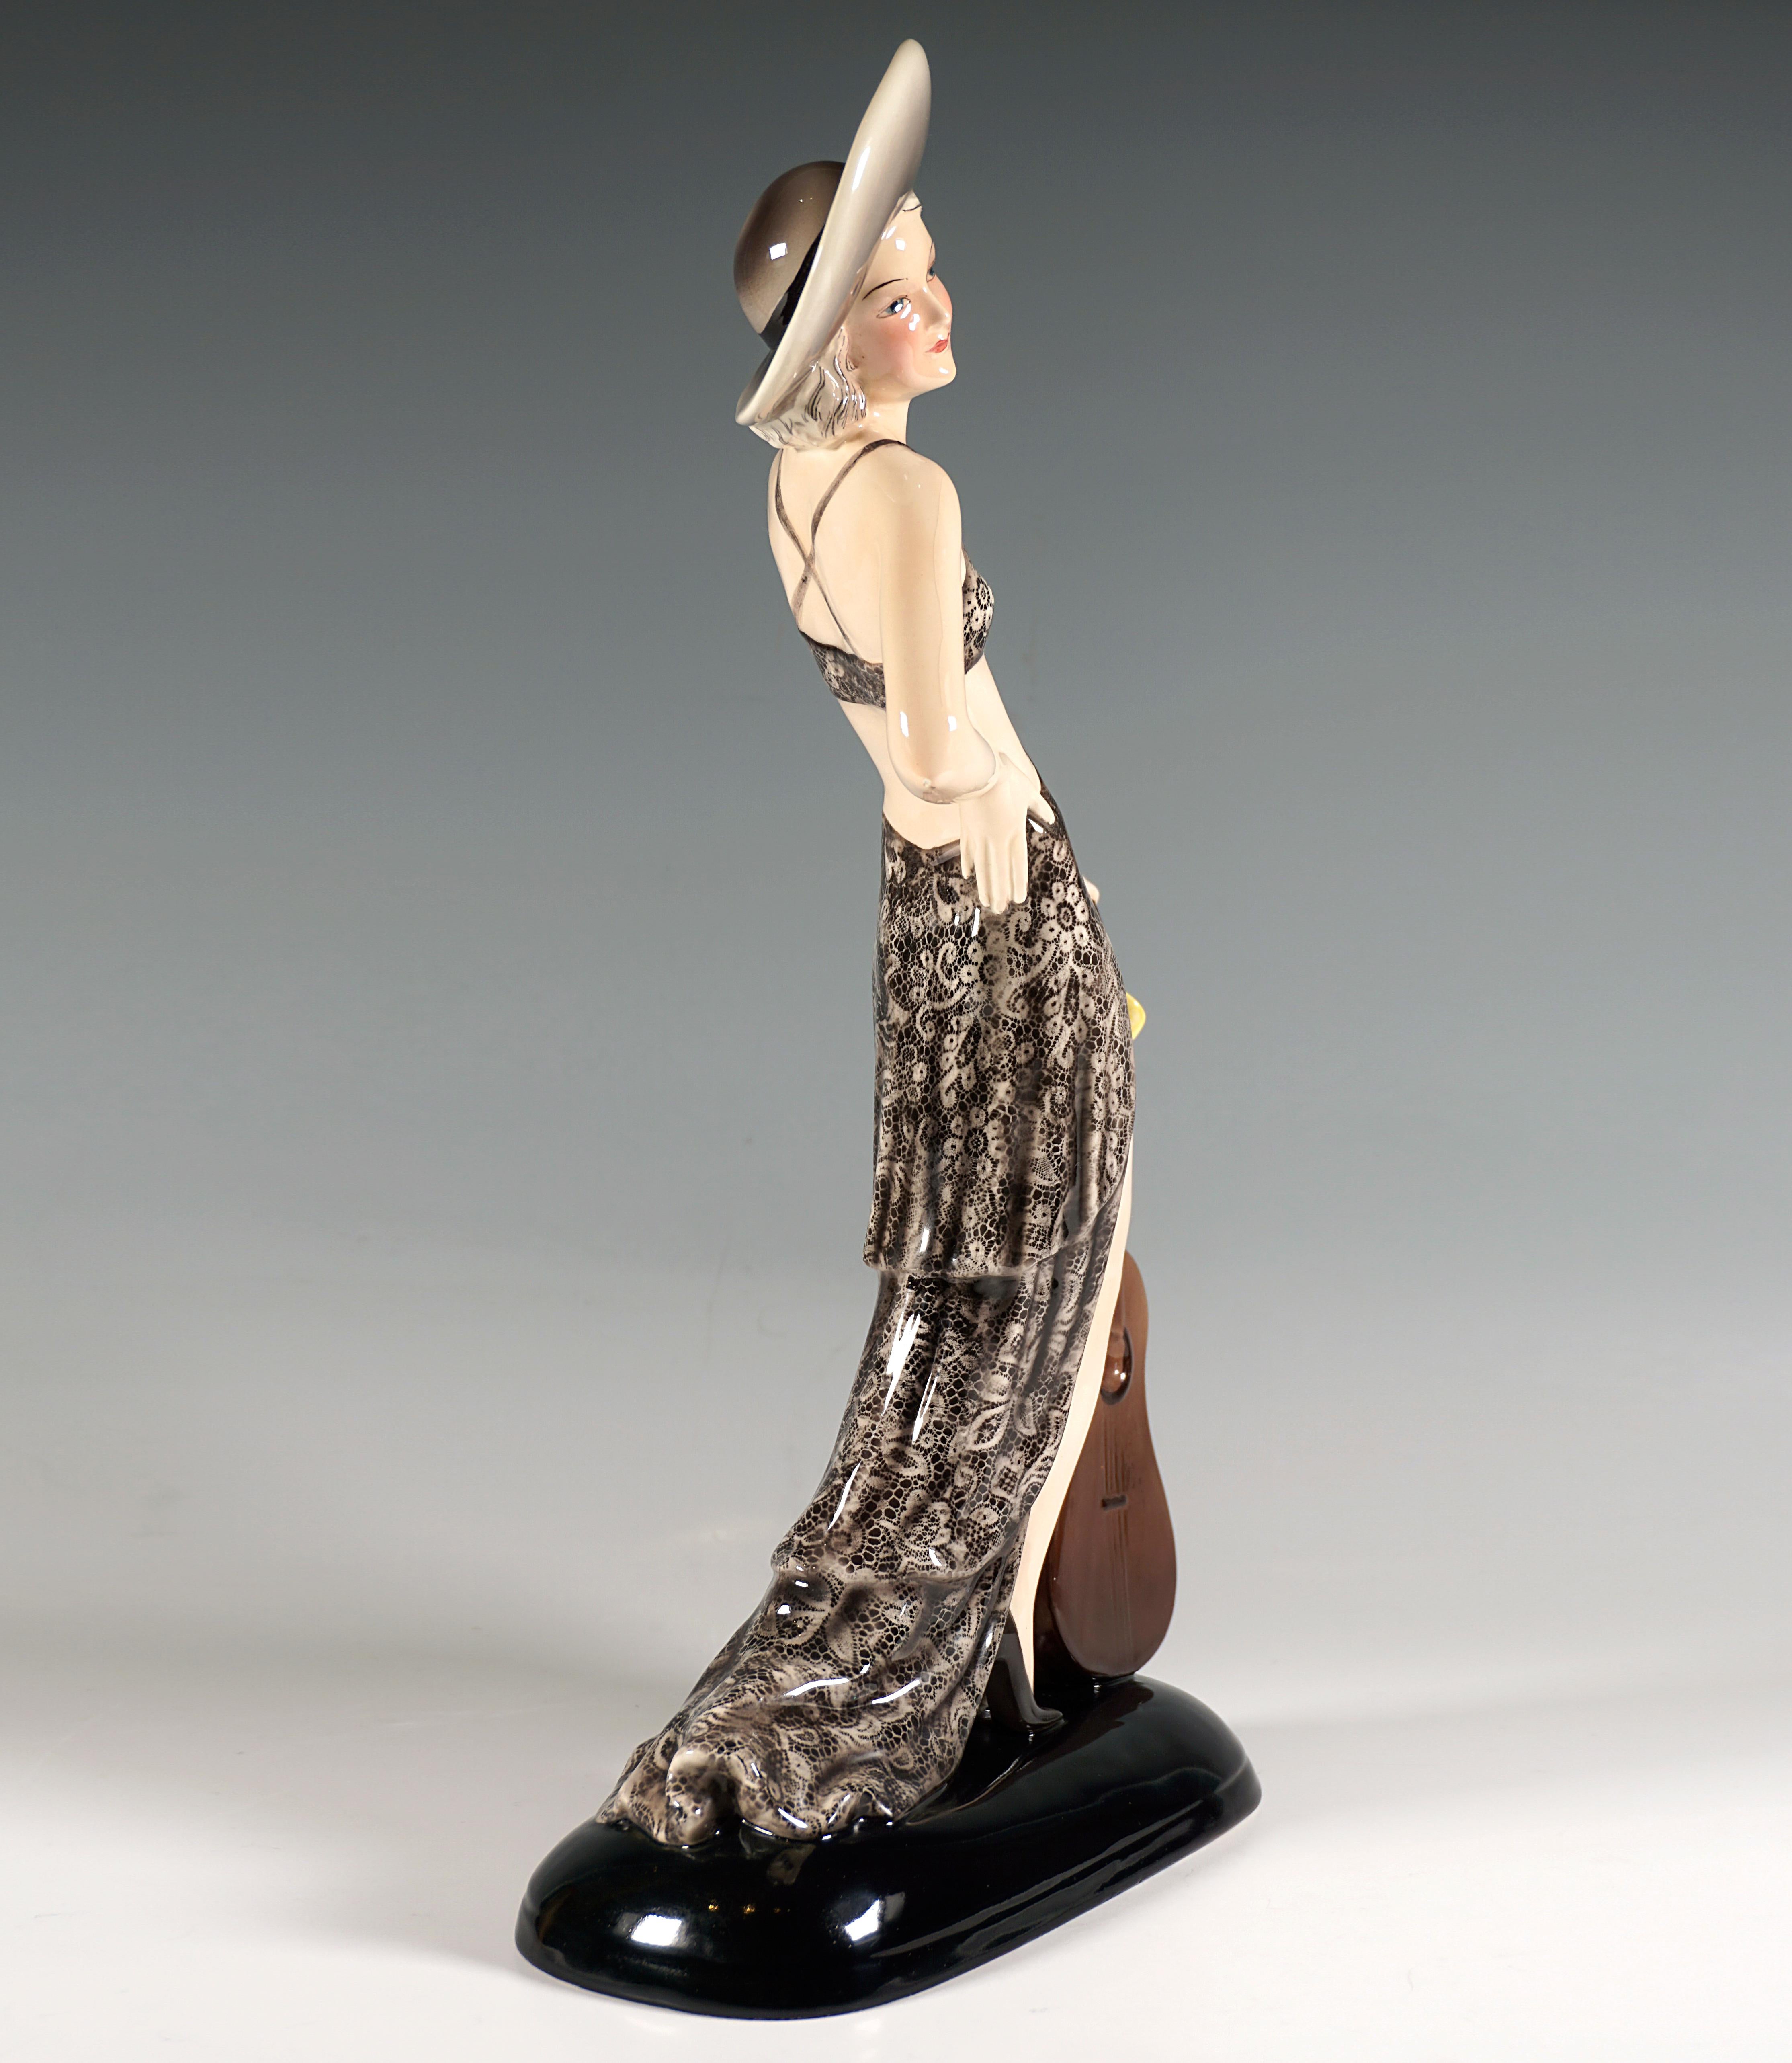 Rare and exclusive Goldscheider Art Déco Ceramic Figurine:
Posing young lady in a dark gray lace dress with a bustier attached to the front of the skirt, an elegant, wide-brimmed, light-colored hat on her blond curls, looking to the right and